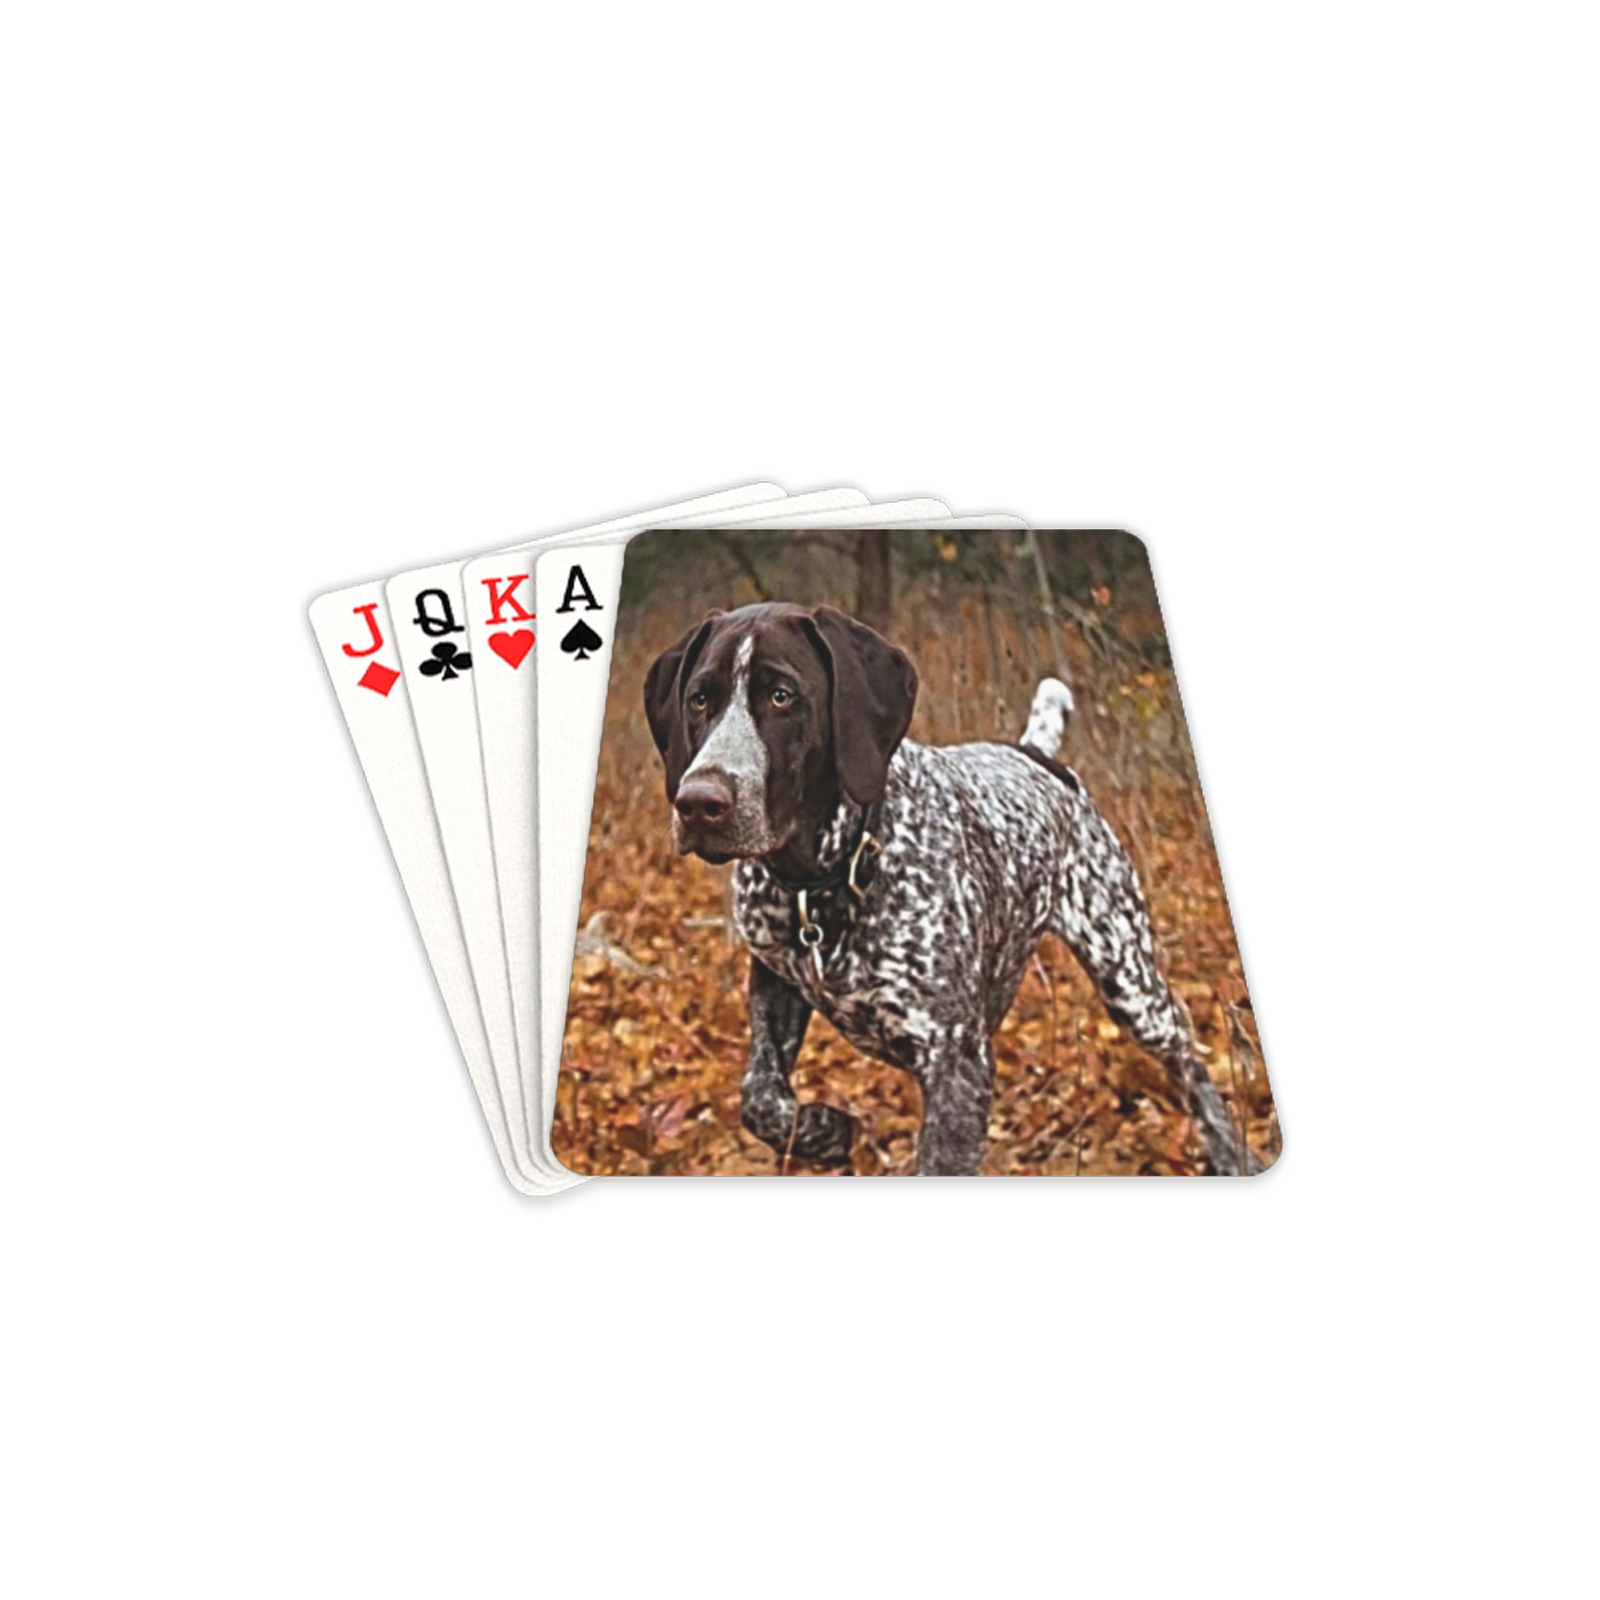 Pointer 2 Playing Cards 2.5"x3.5"